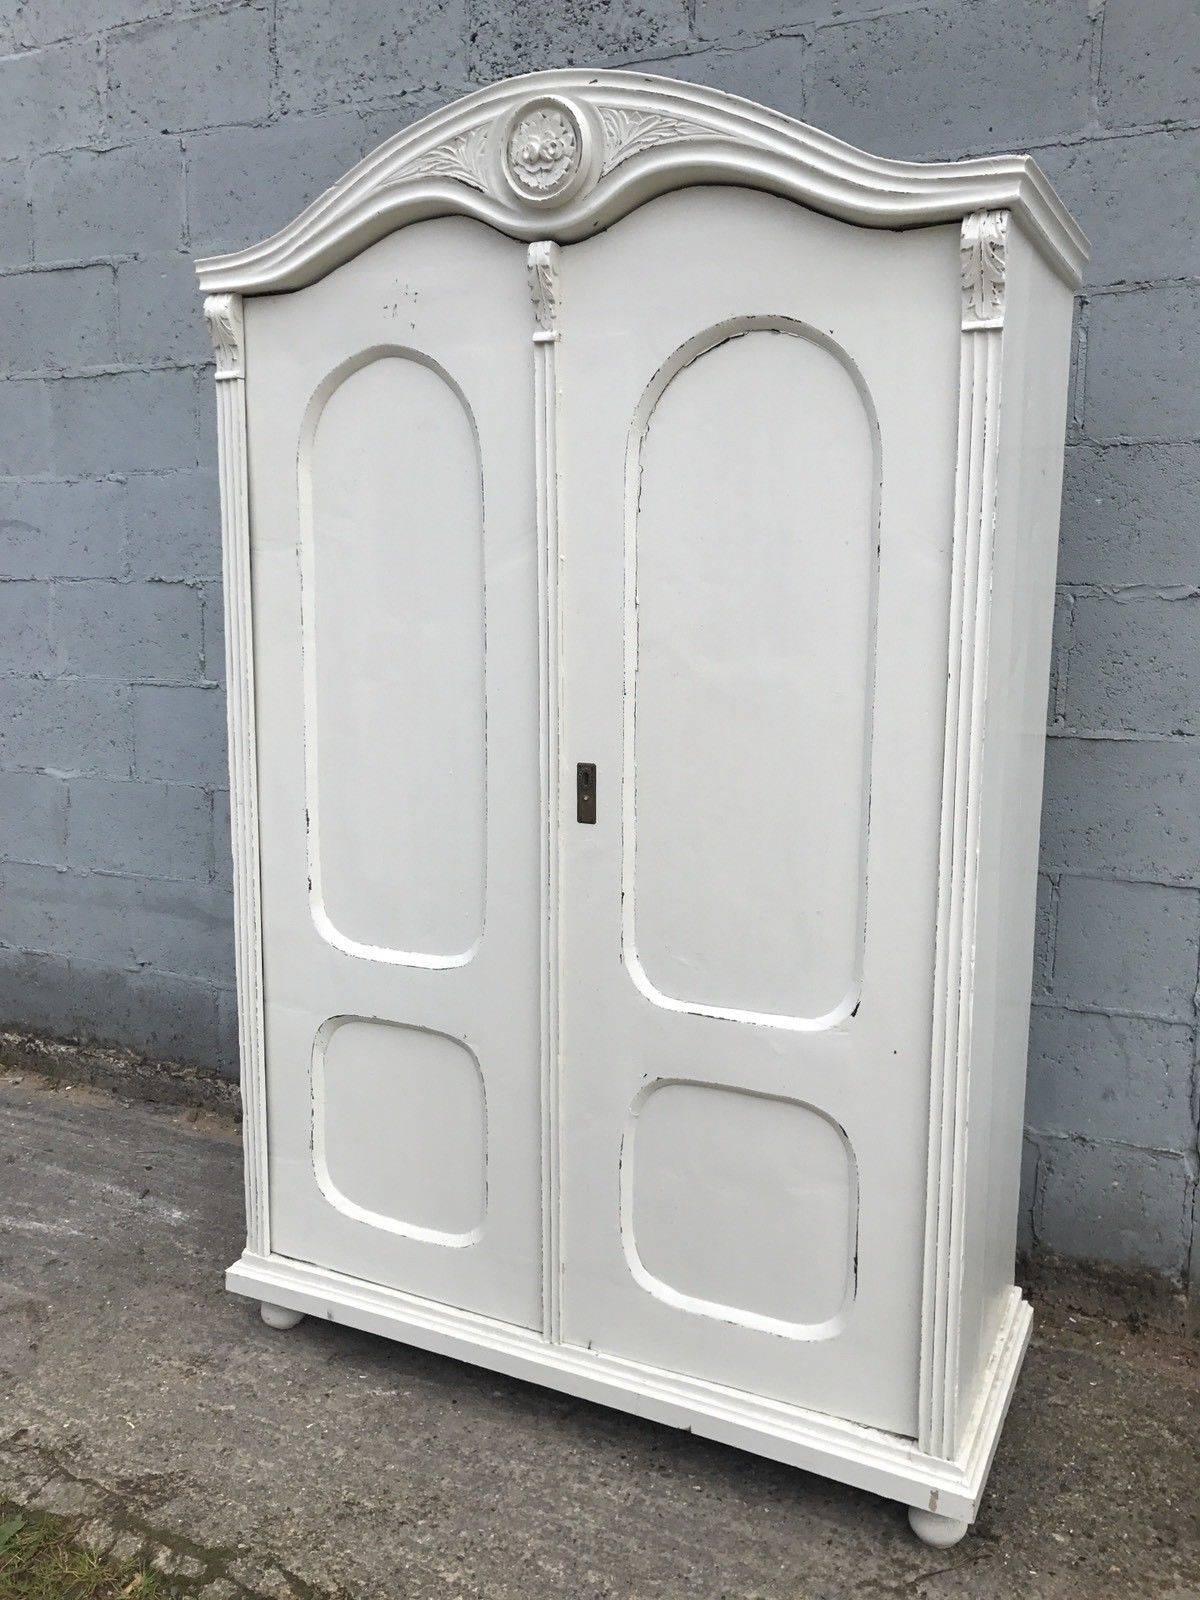 This is a beautiful French larder/cupboard or wardrobe.

It's been painted in white color, slightly distressed.

Double carved door opens up to good storage. Can be fitted with shelves or hanging rails as an extra, if needed.

Dimensions: